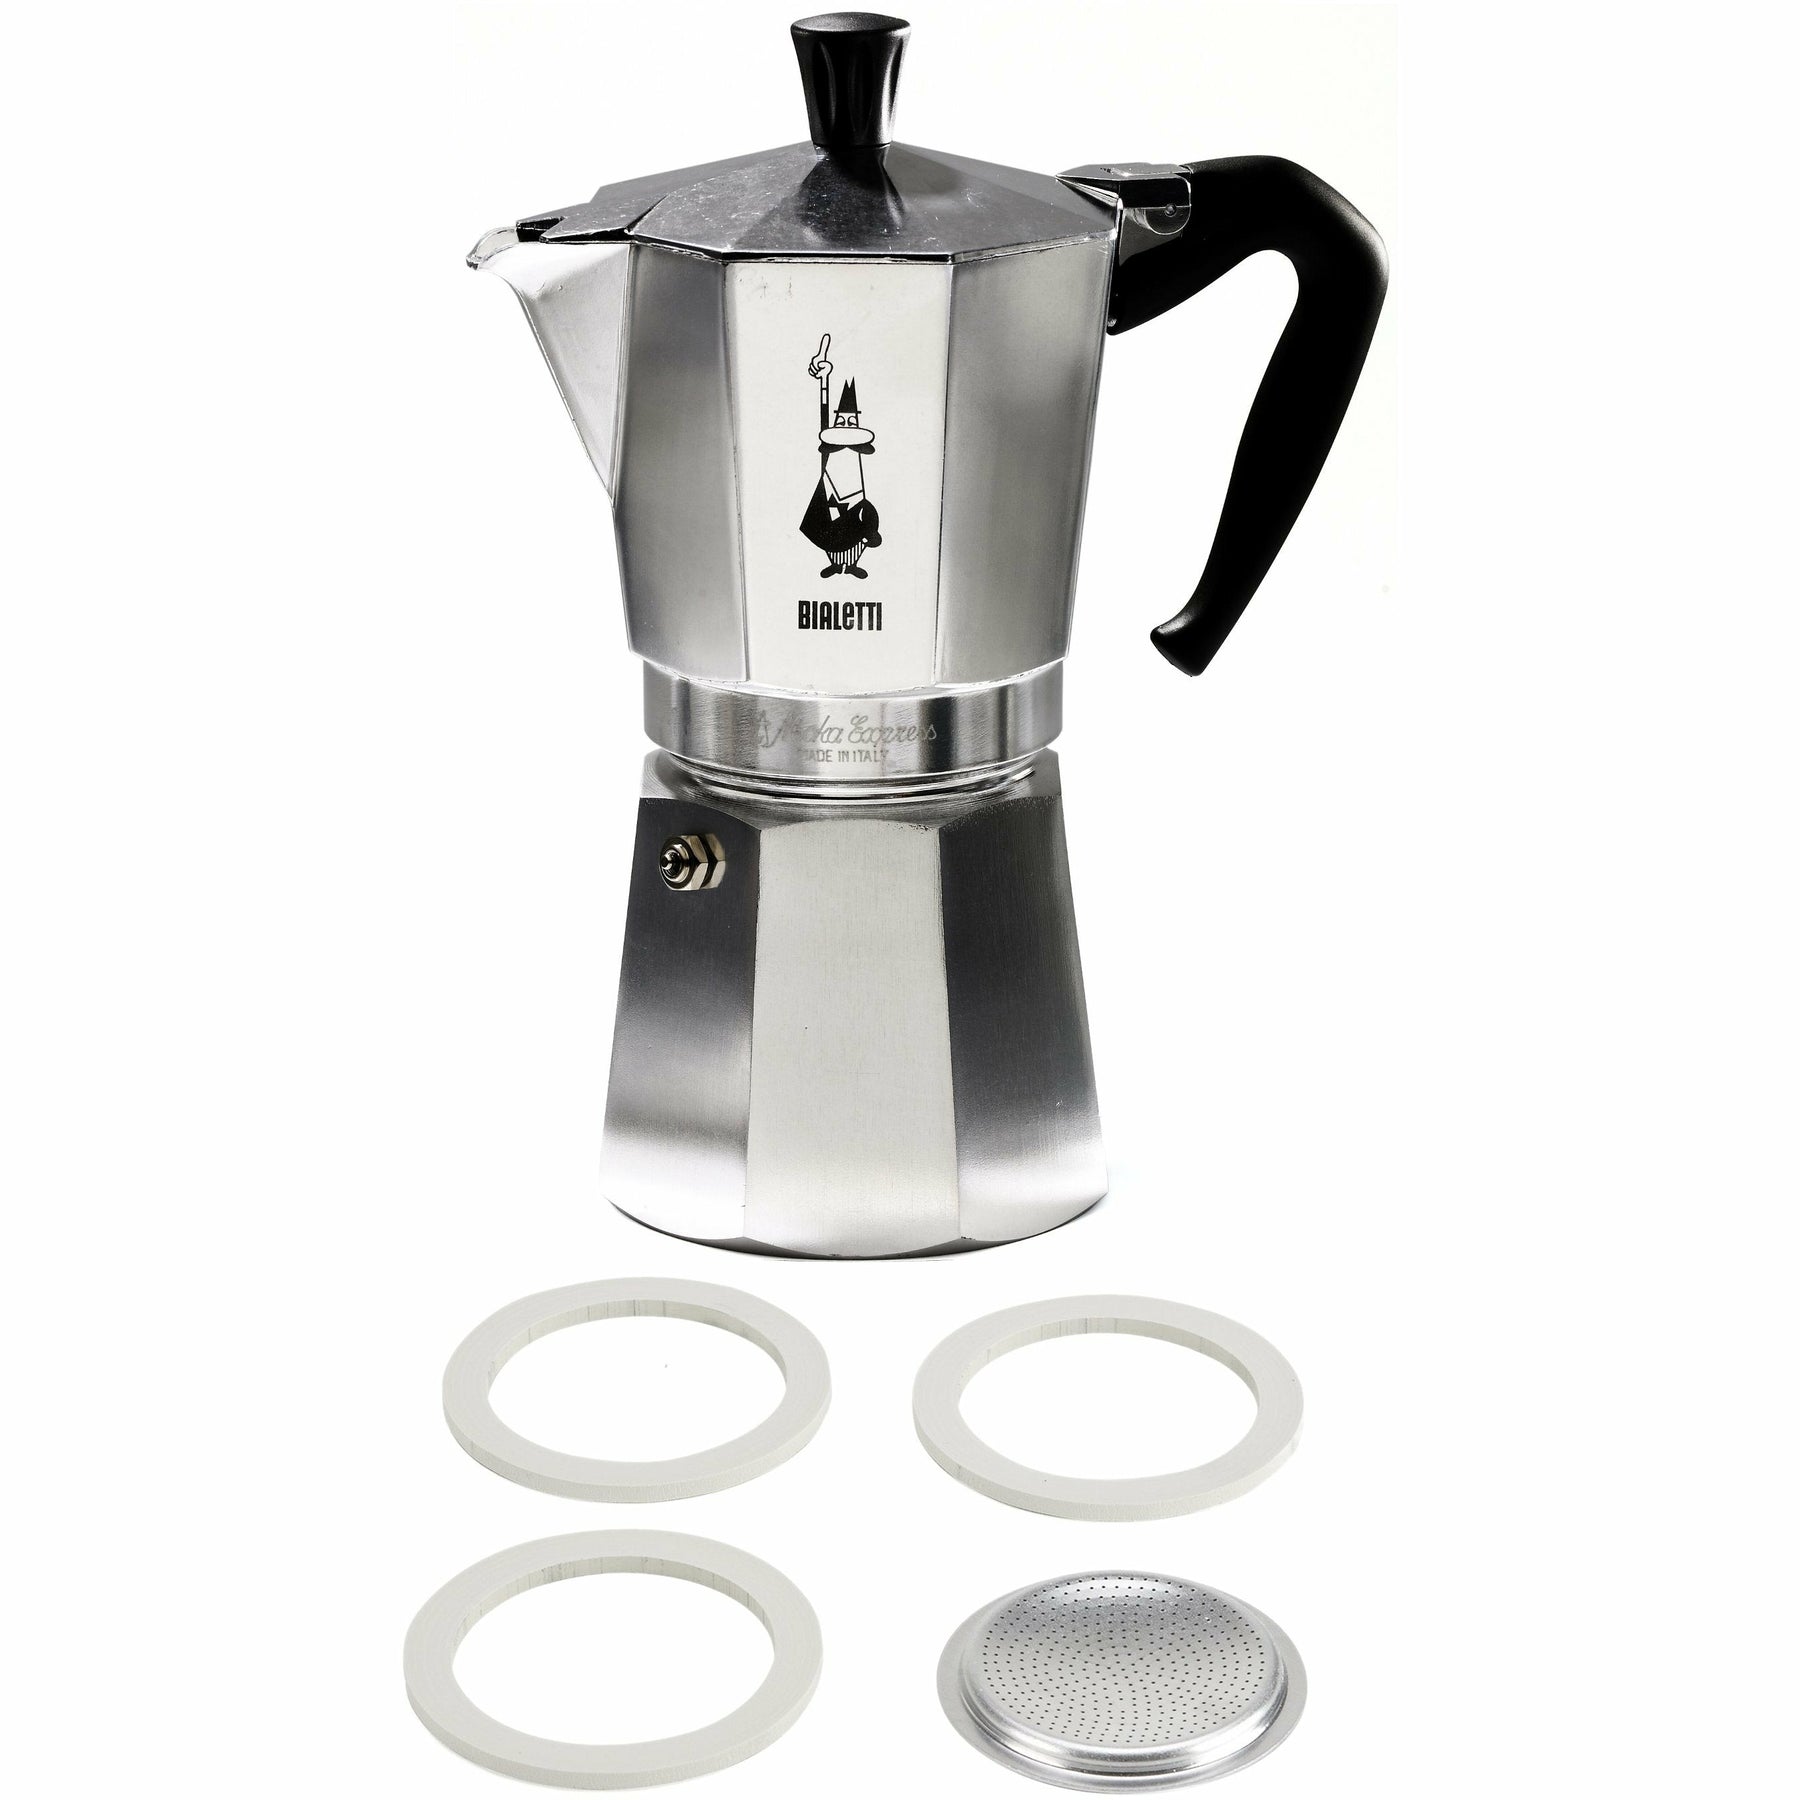 Escali London Sip Stainless Steel Stovetop Espresso Coffee Maker